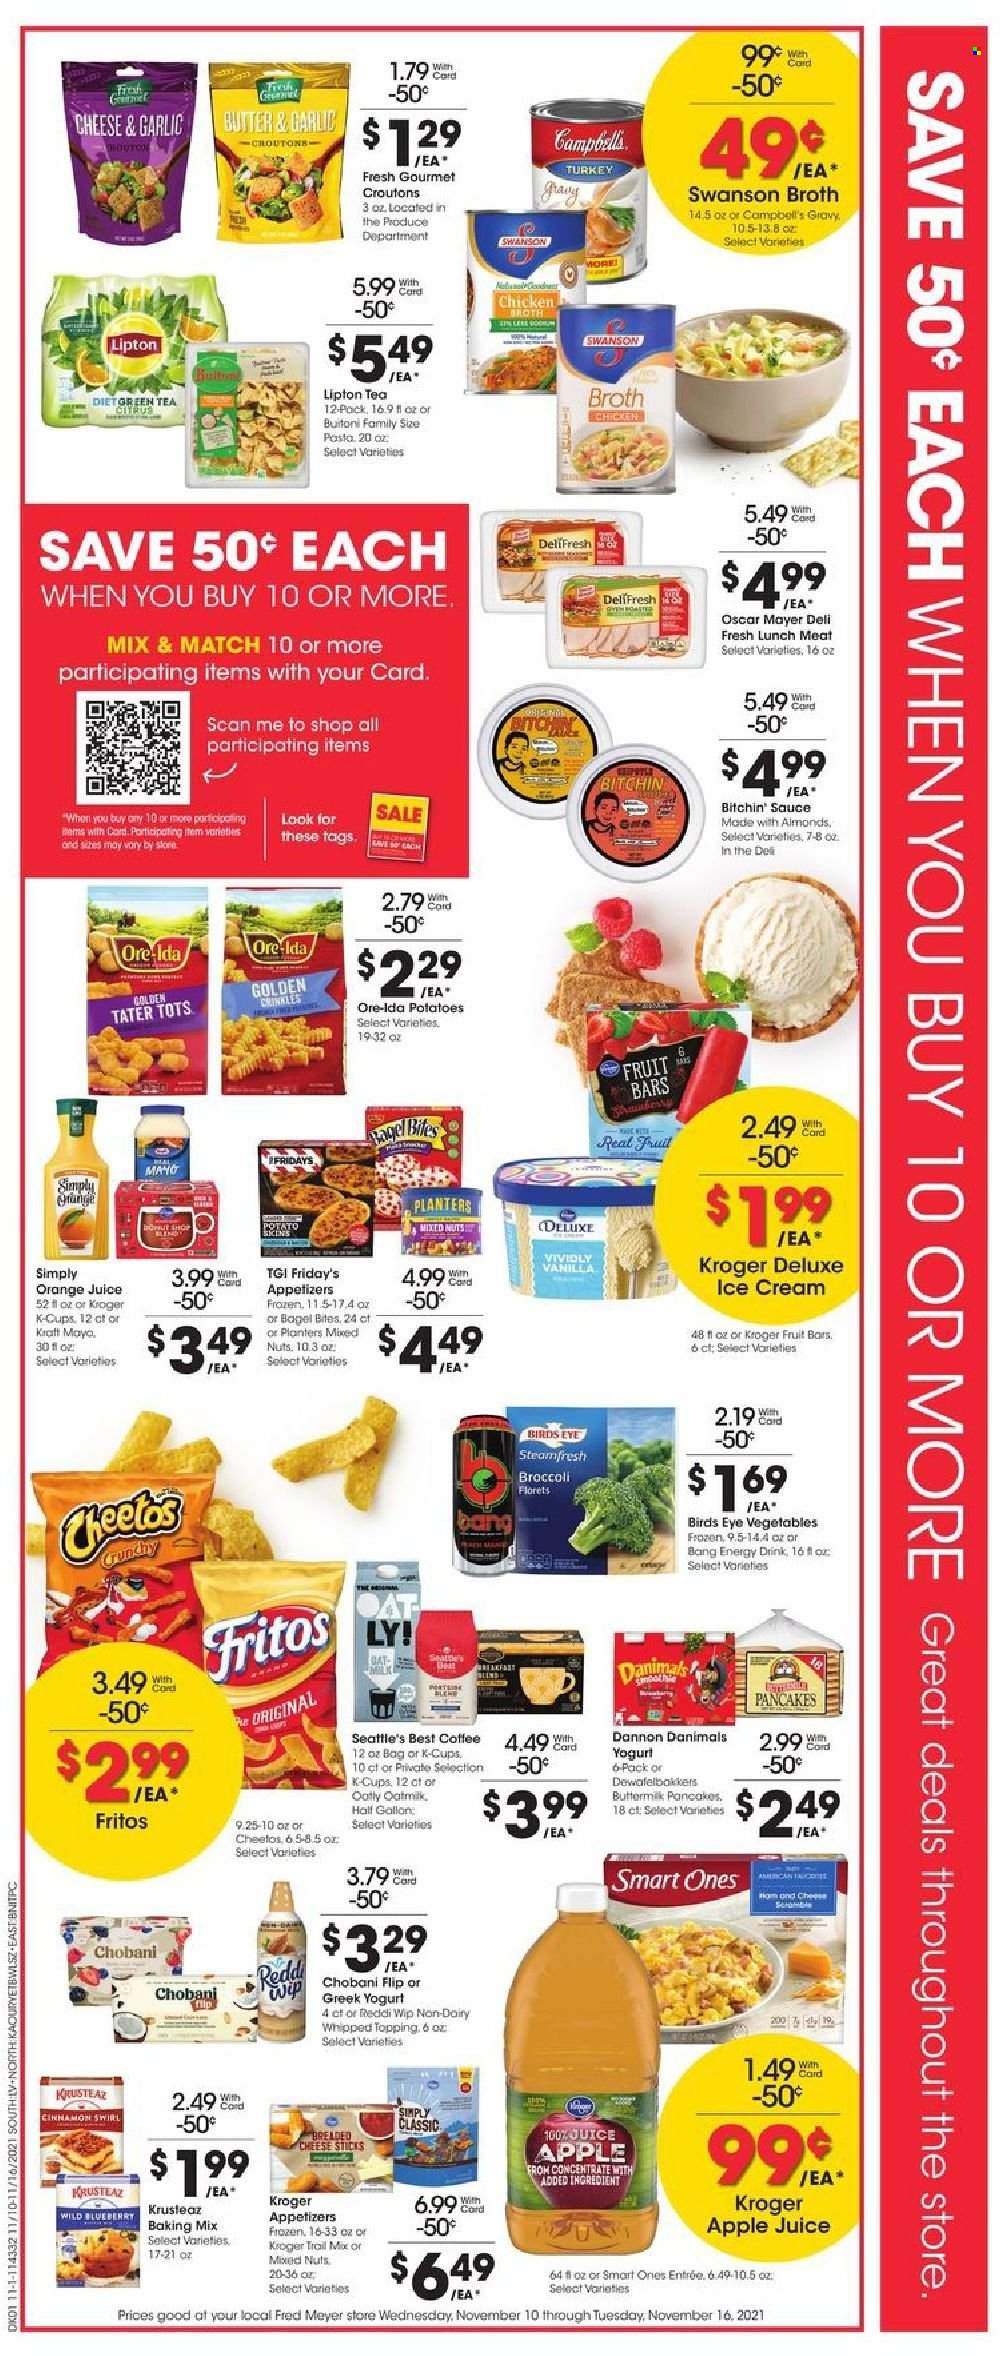 thumbnail - Fred Meyer Flyer - 11/10/2021 - 11/16/2021 - Sales products - broccoli, potatoes, Campbell's, sauce, pancakes, Bird's Eye, Kraft®, Buitoni, ham, Oscar Mayer, lunch meat, cheese, greek yoghurt, yoghurt, Chobani, Dannon, milk, oat milk, butter, mayonnaise, ice cream, Ore-Ida, tater tots, Fritos, Cheetos, croutons, chicken broth, topping, broth, cinnamon, mixed nuts, Planters, trail mix, apple juice, orange juice, juice, energy drink, Lipton, tea, coffee, coffee capsules, K-Cups. Page 2.